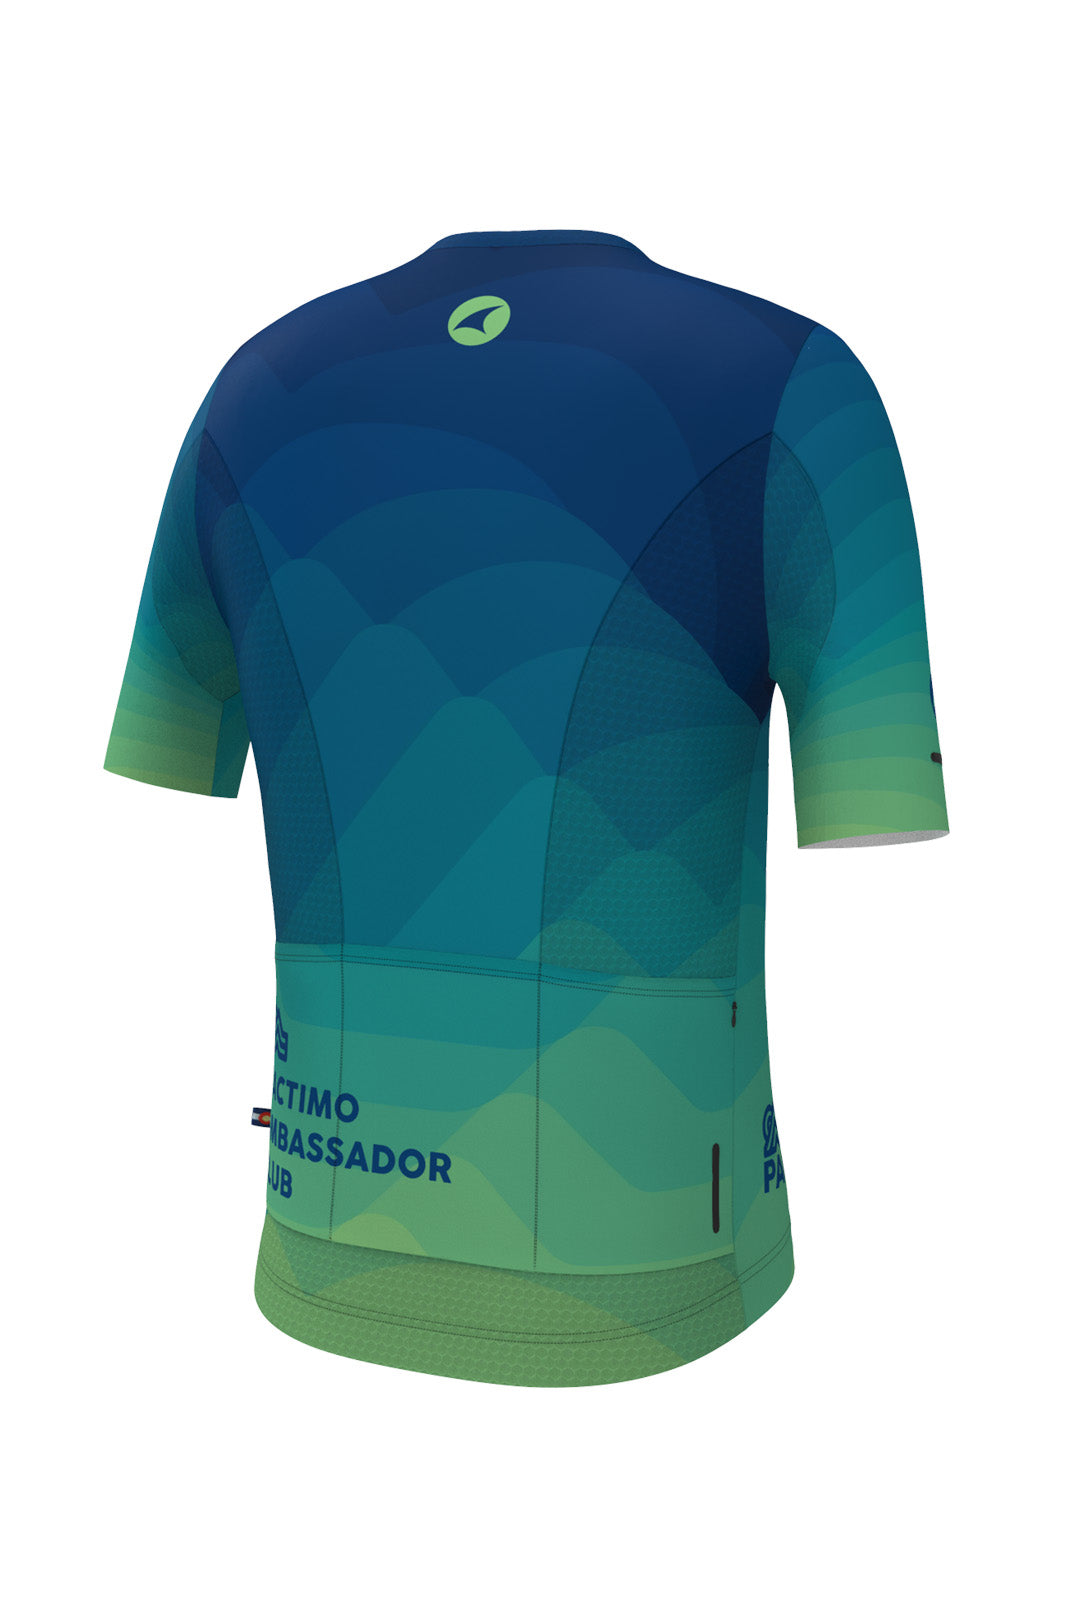 Men's PAC Summit Aero Cycling Jersey - Twighlight Back View